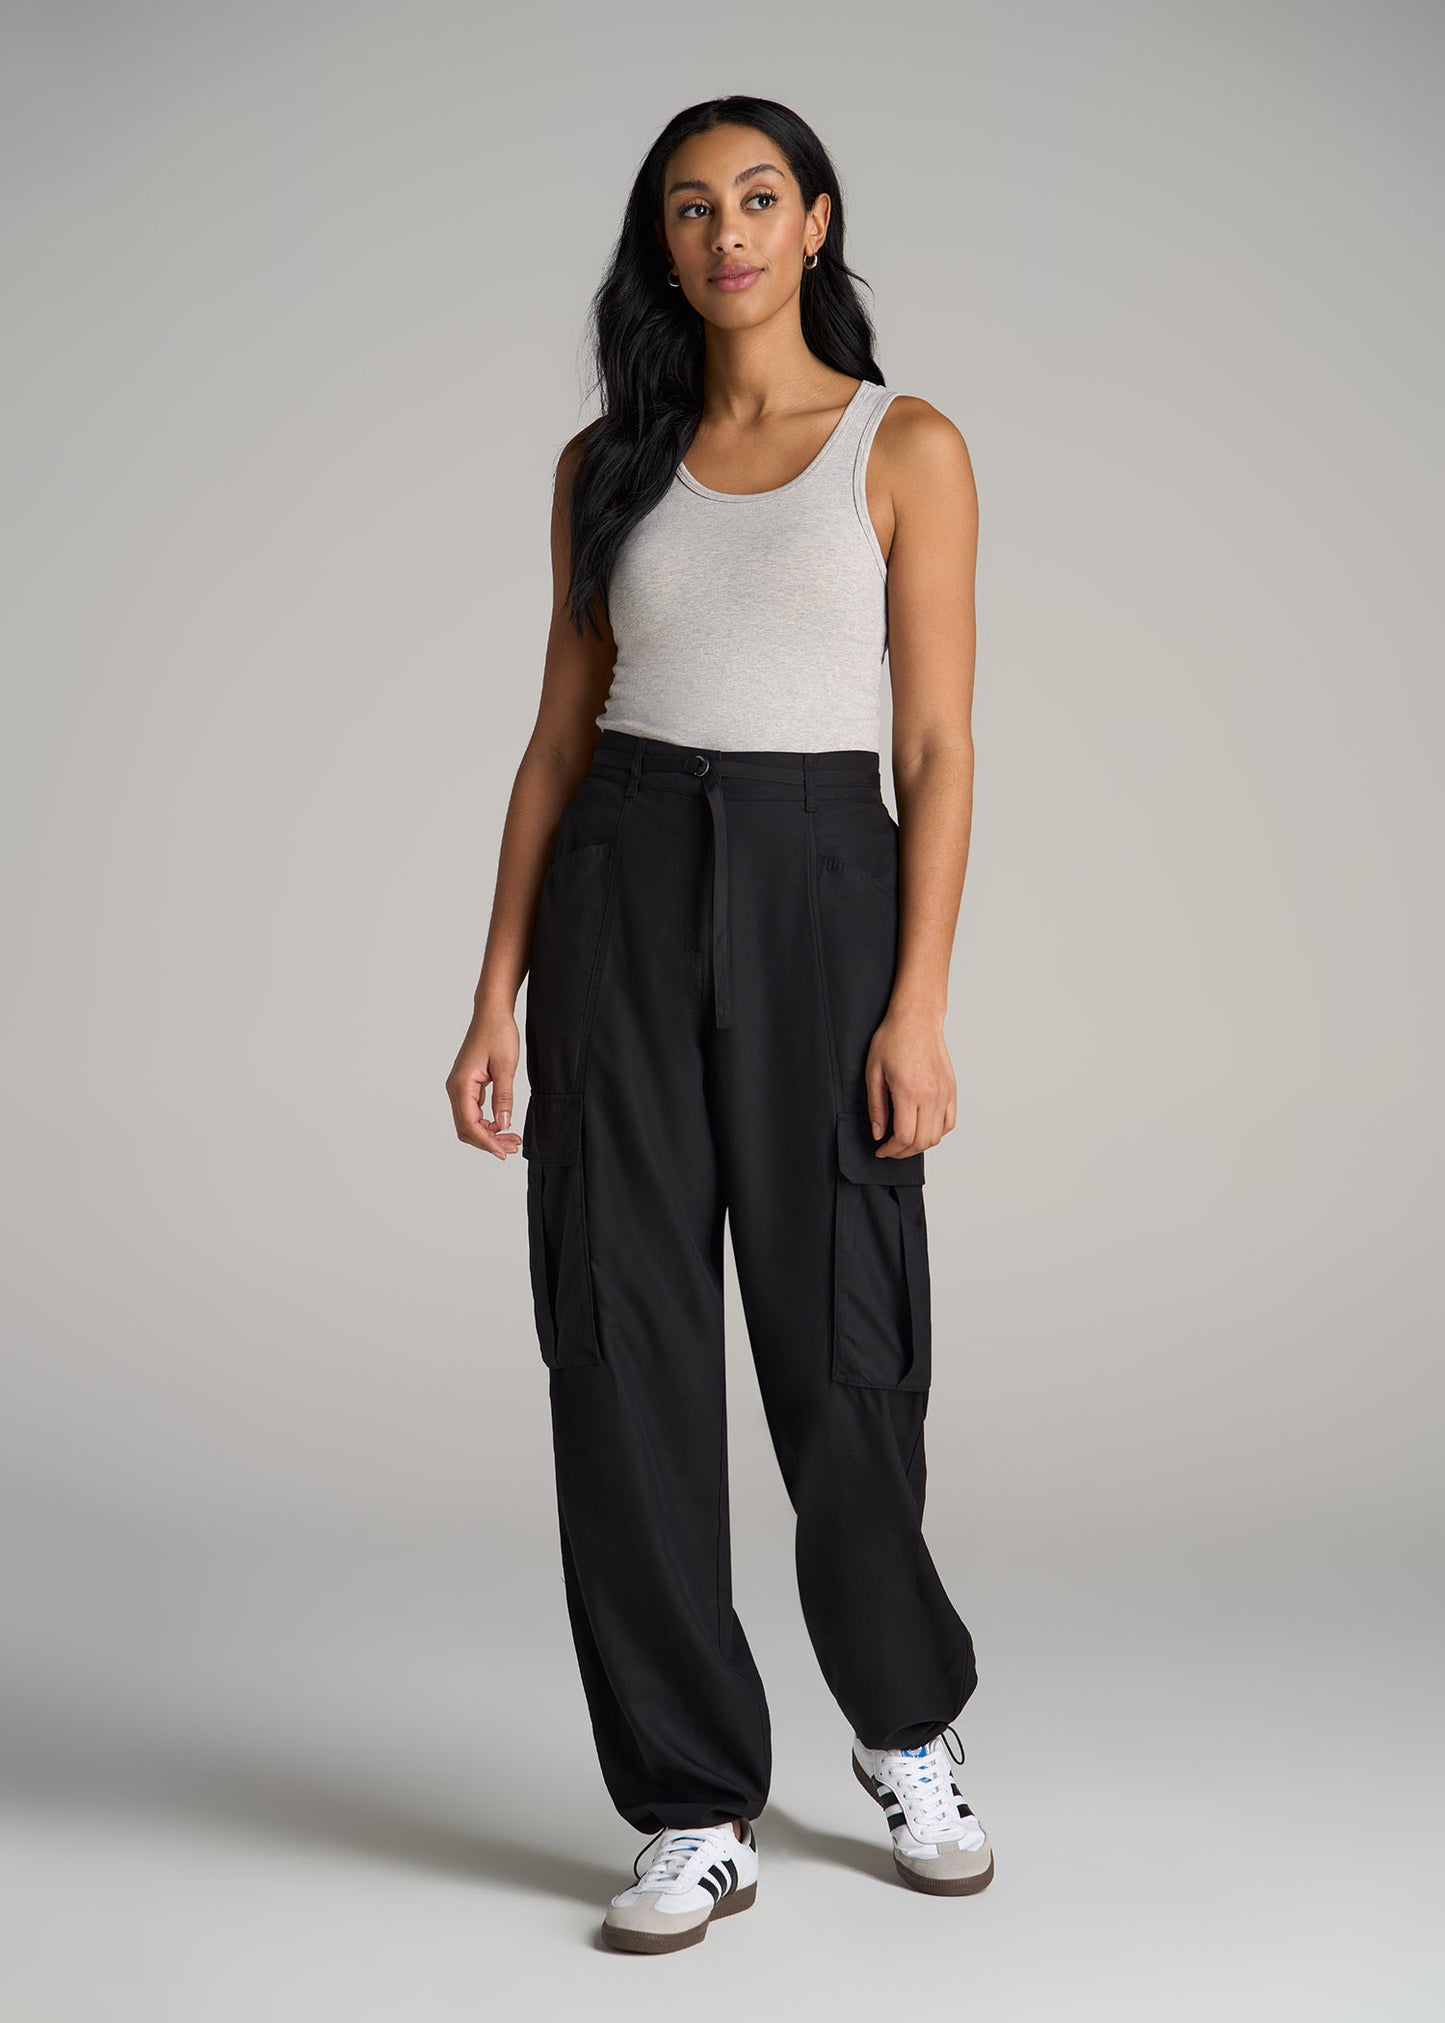 A tall woman wearing High Rise Cargo Parachute Pants for Tall Women in Black from American Tall